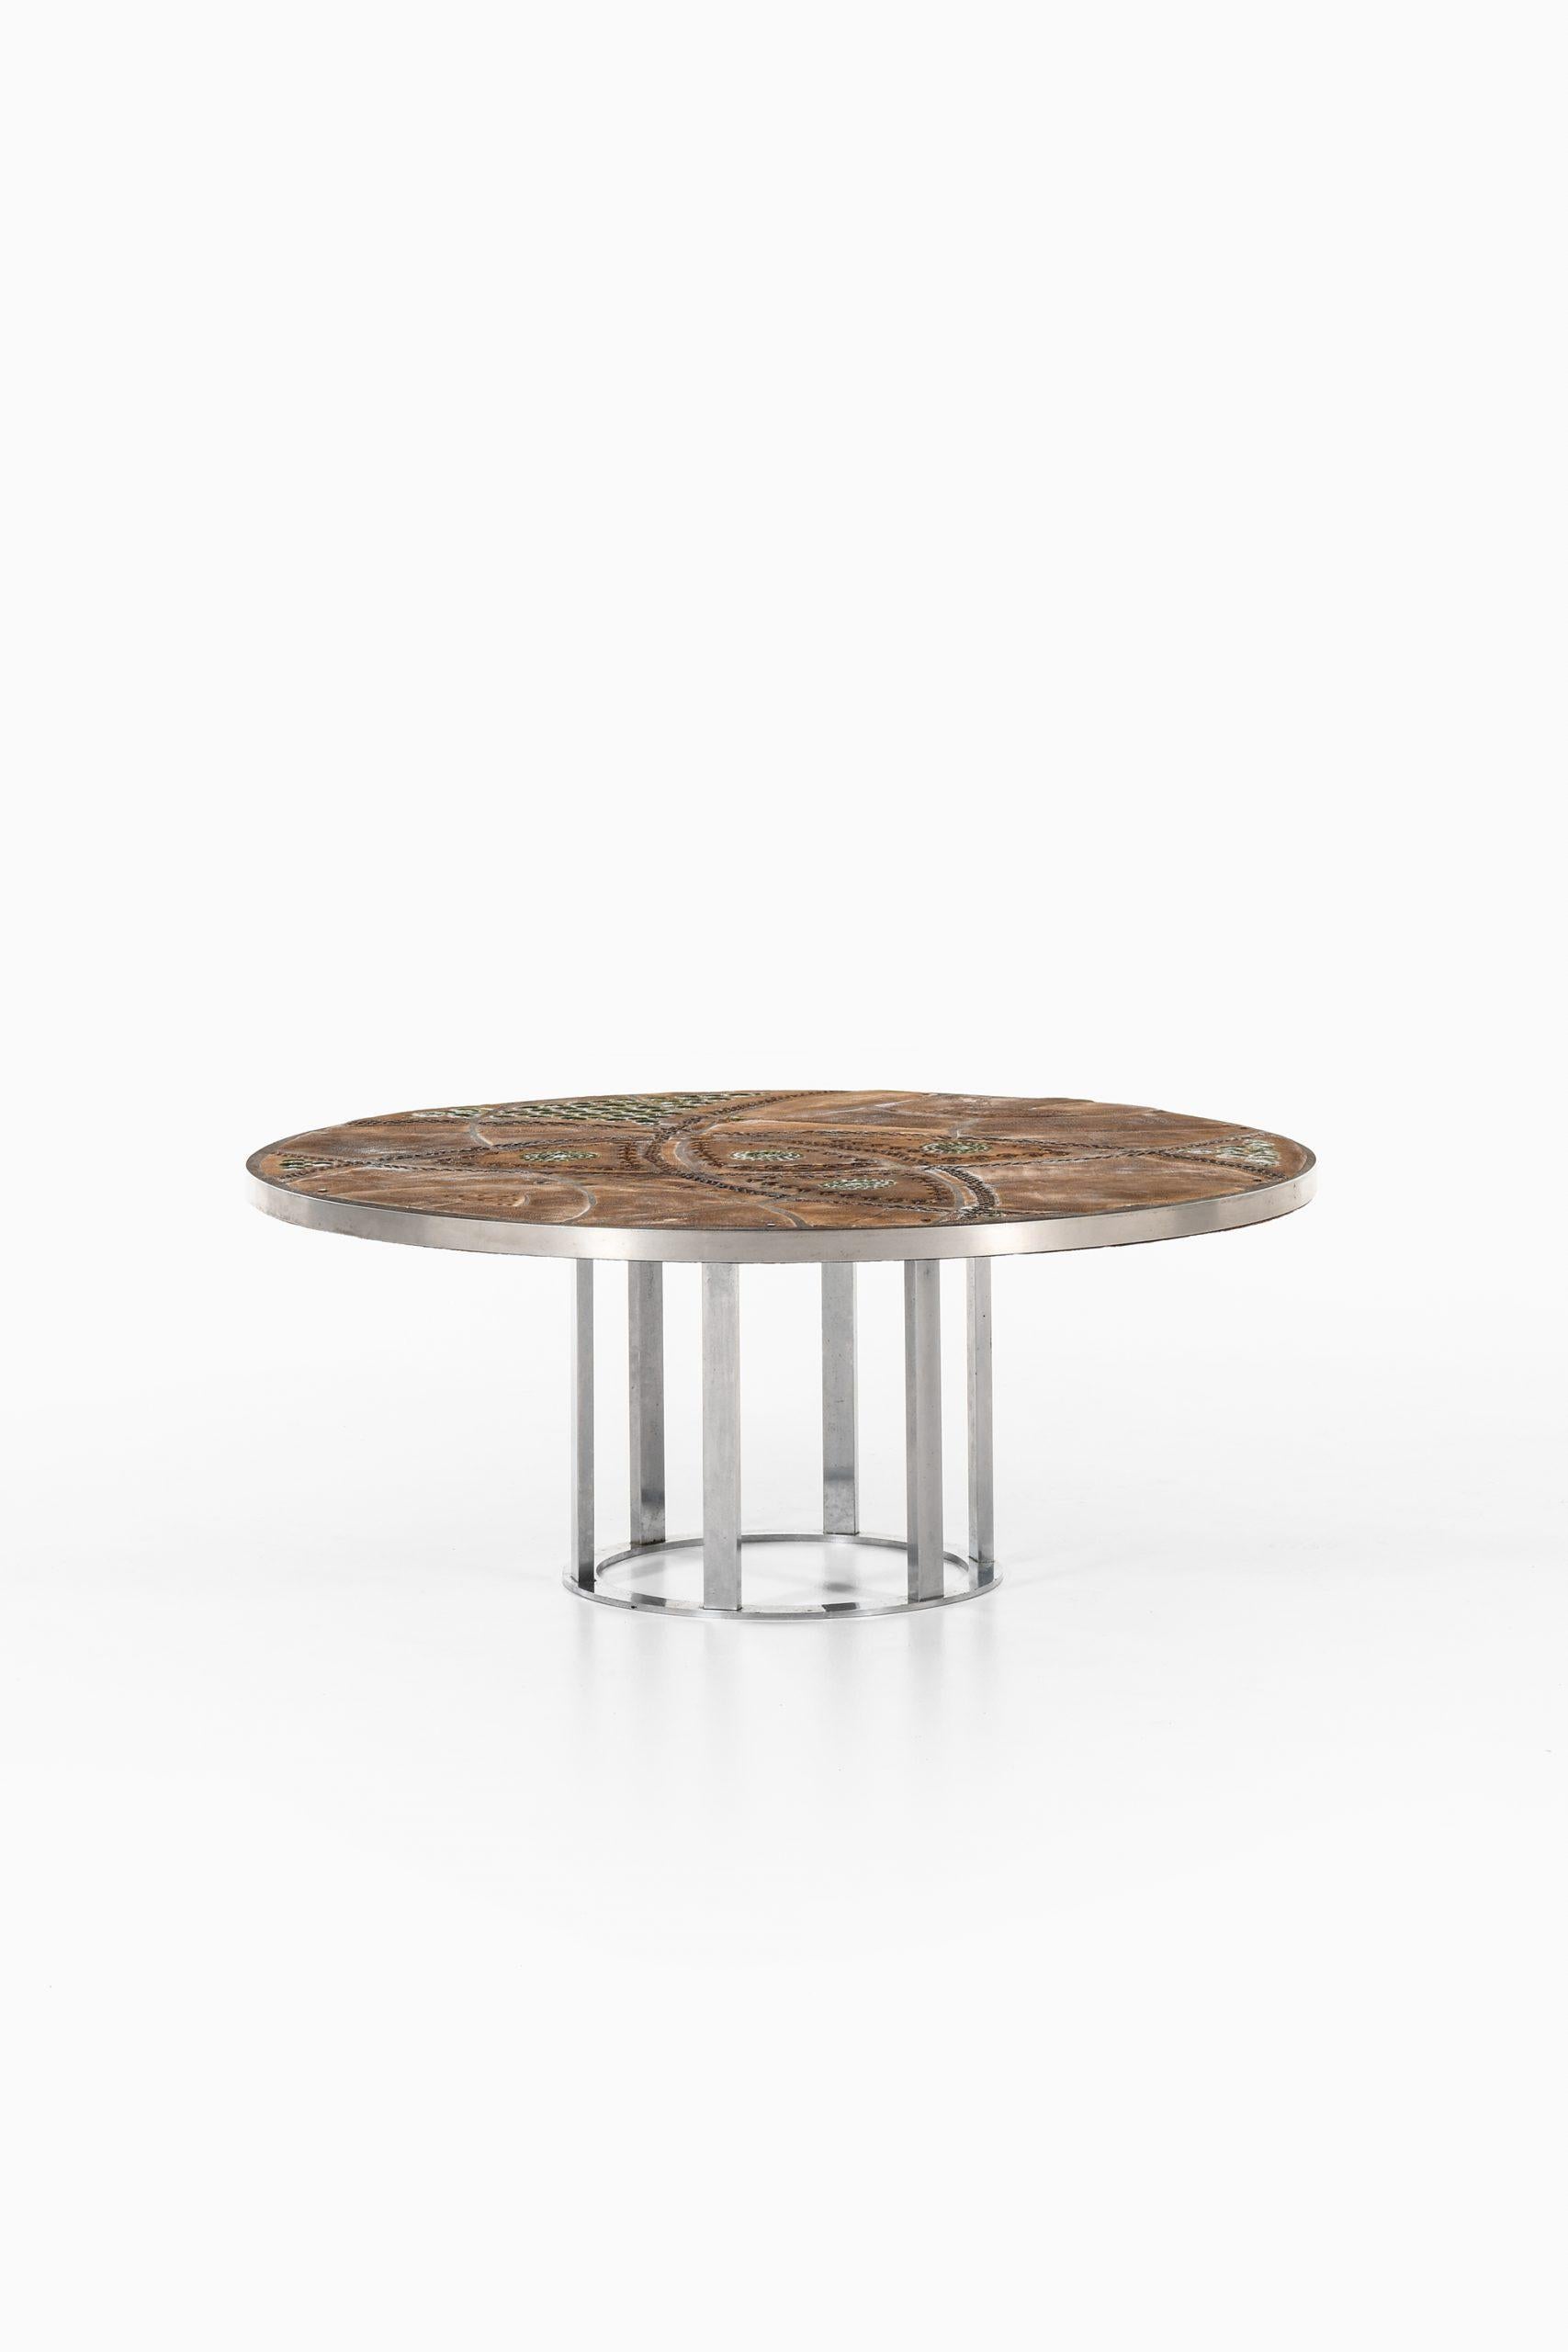 Rare Brutalist coffee table designed by Lilly Just Lichtenberg. Produced in Denmark.